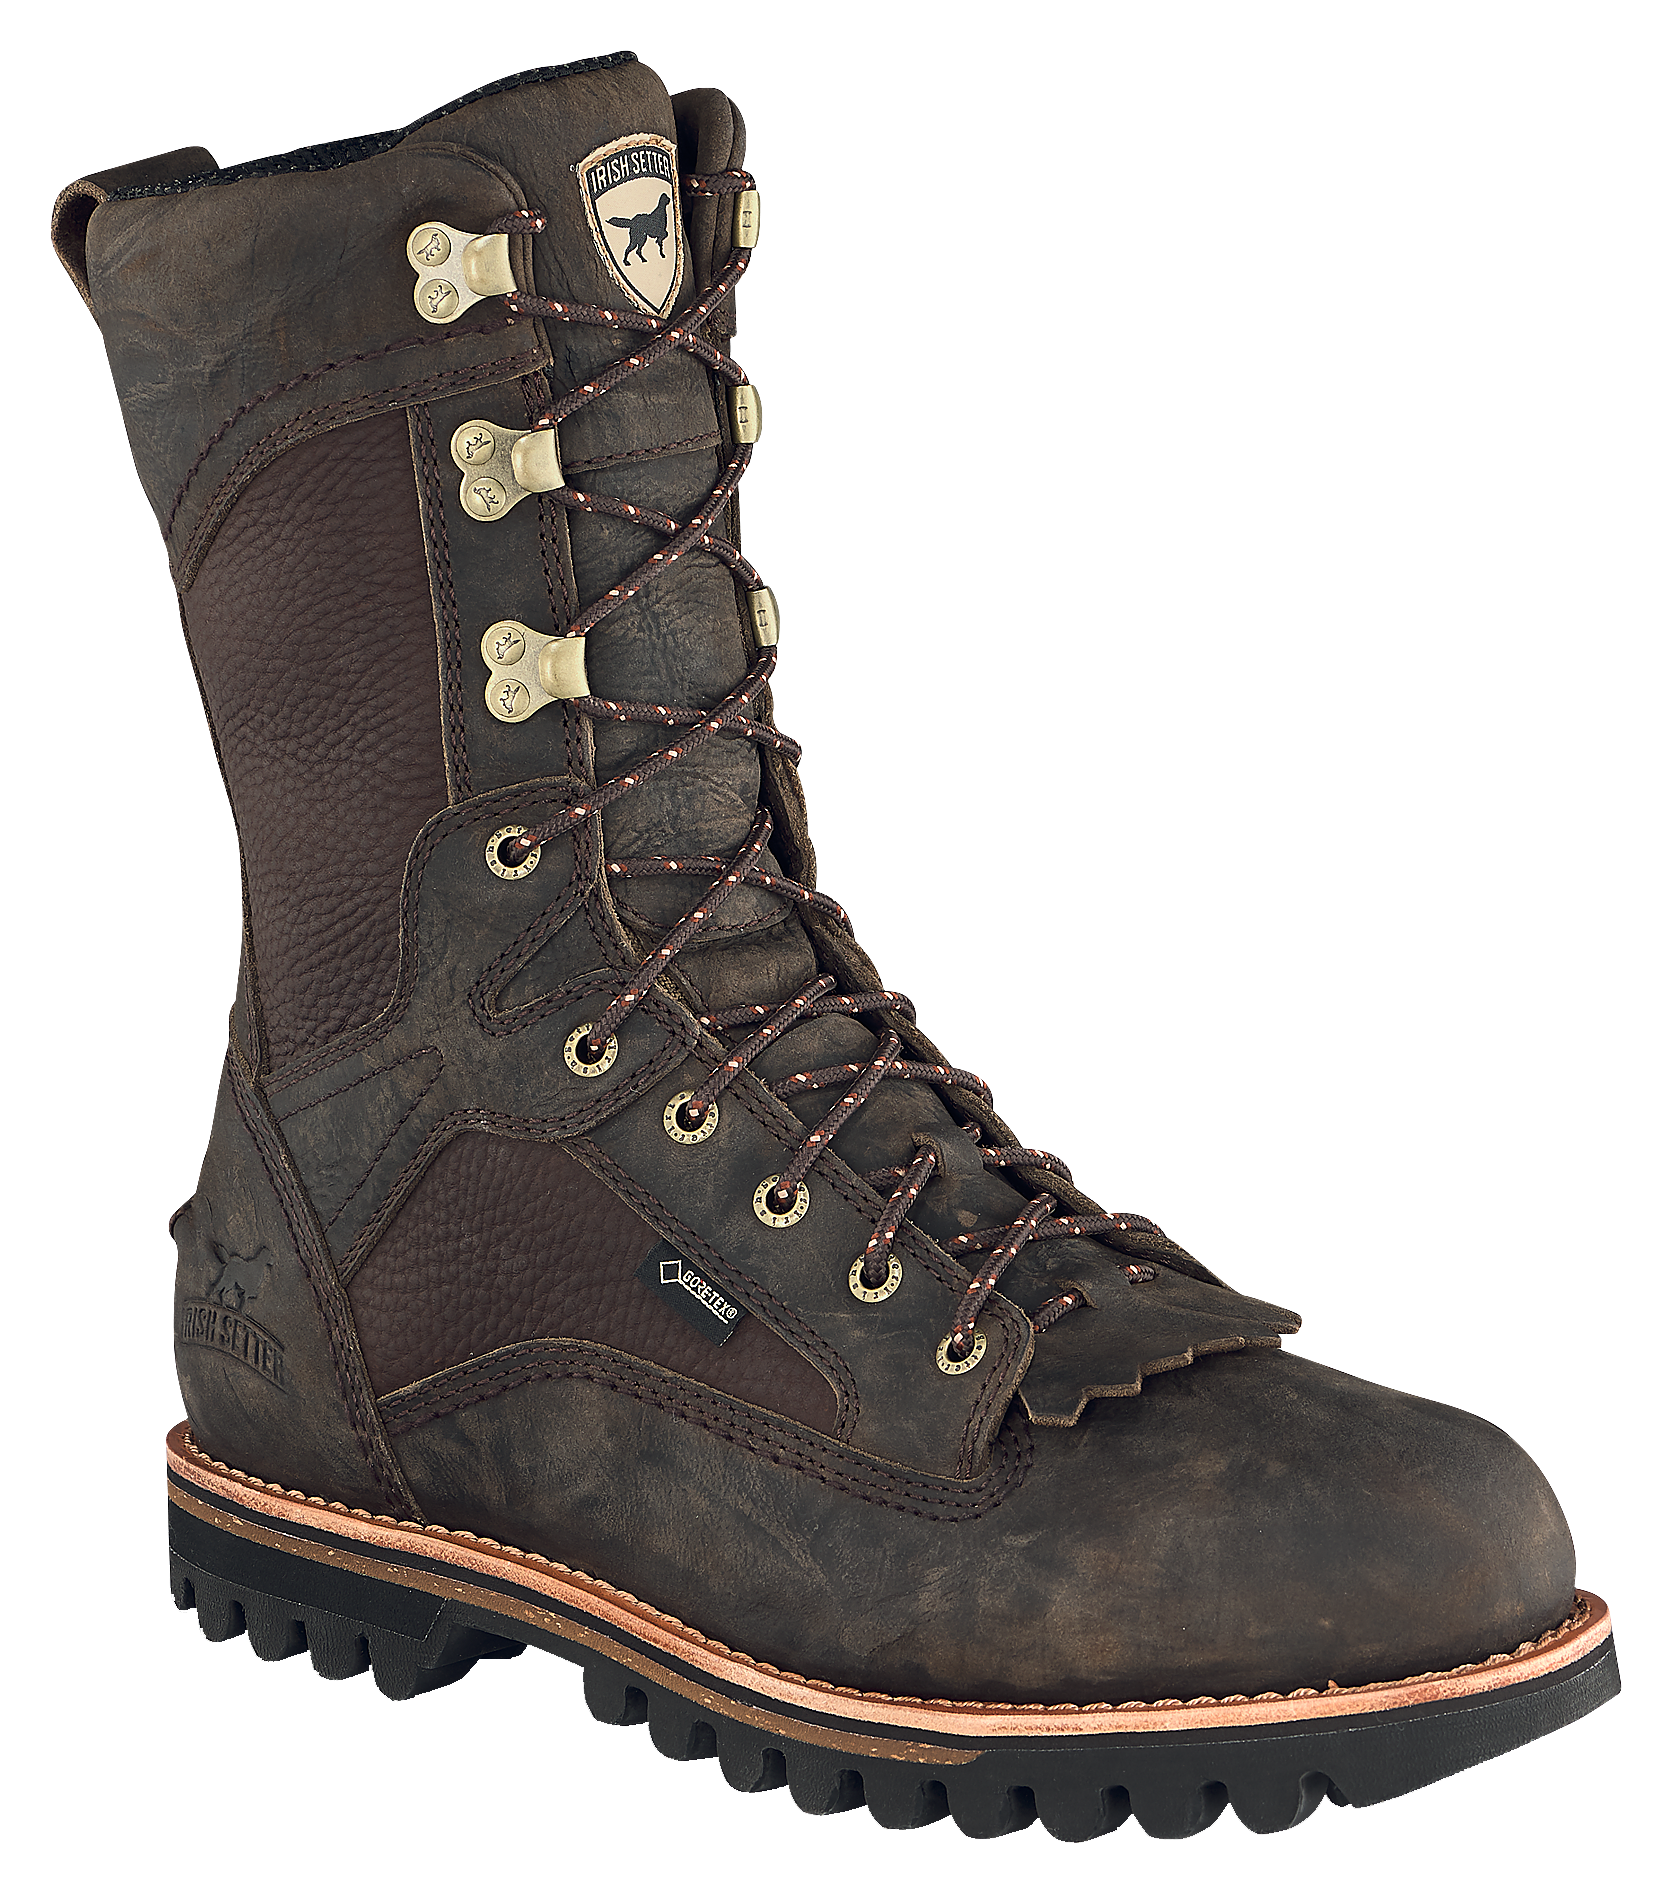 Irish Setter Elk Tracker GORE-TEX Insulated Hunting Boots for Men - Brown - 9W